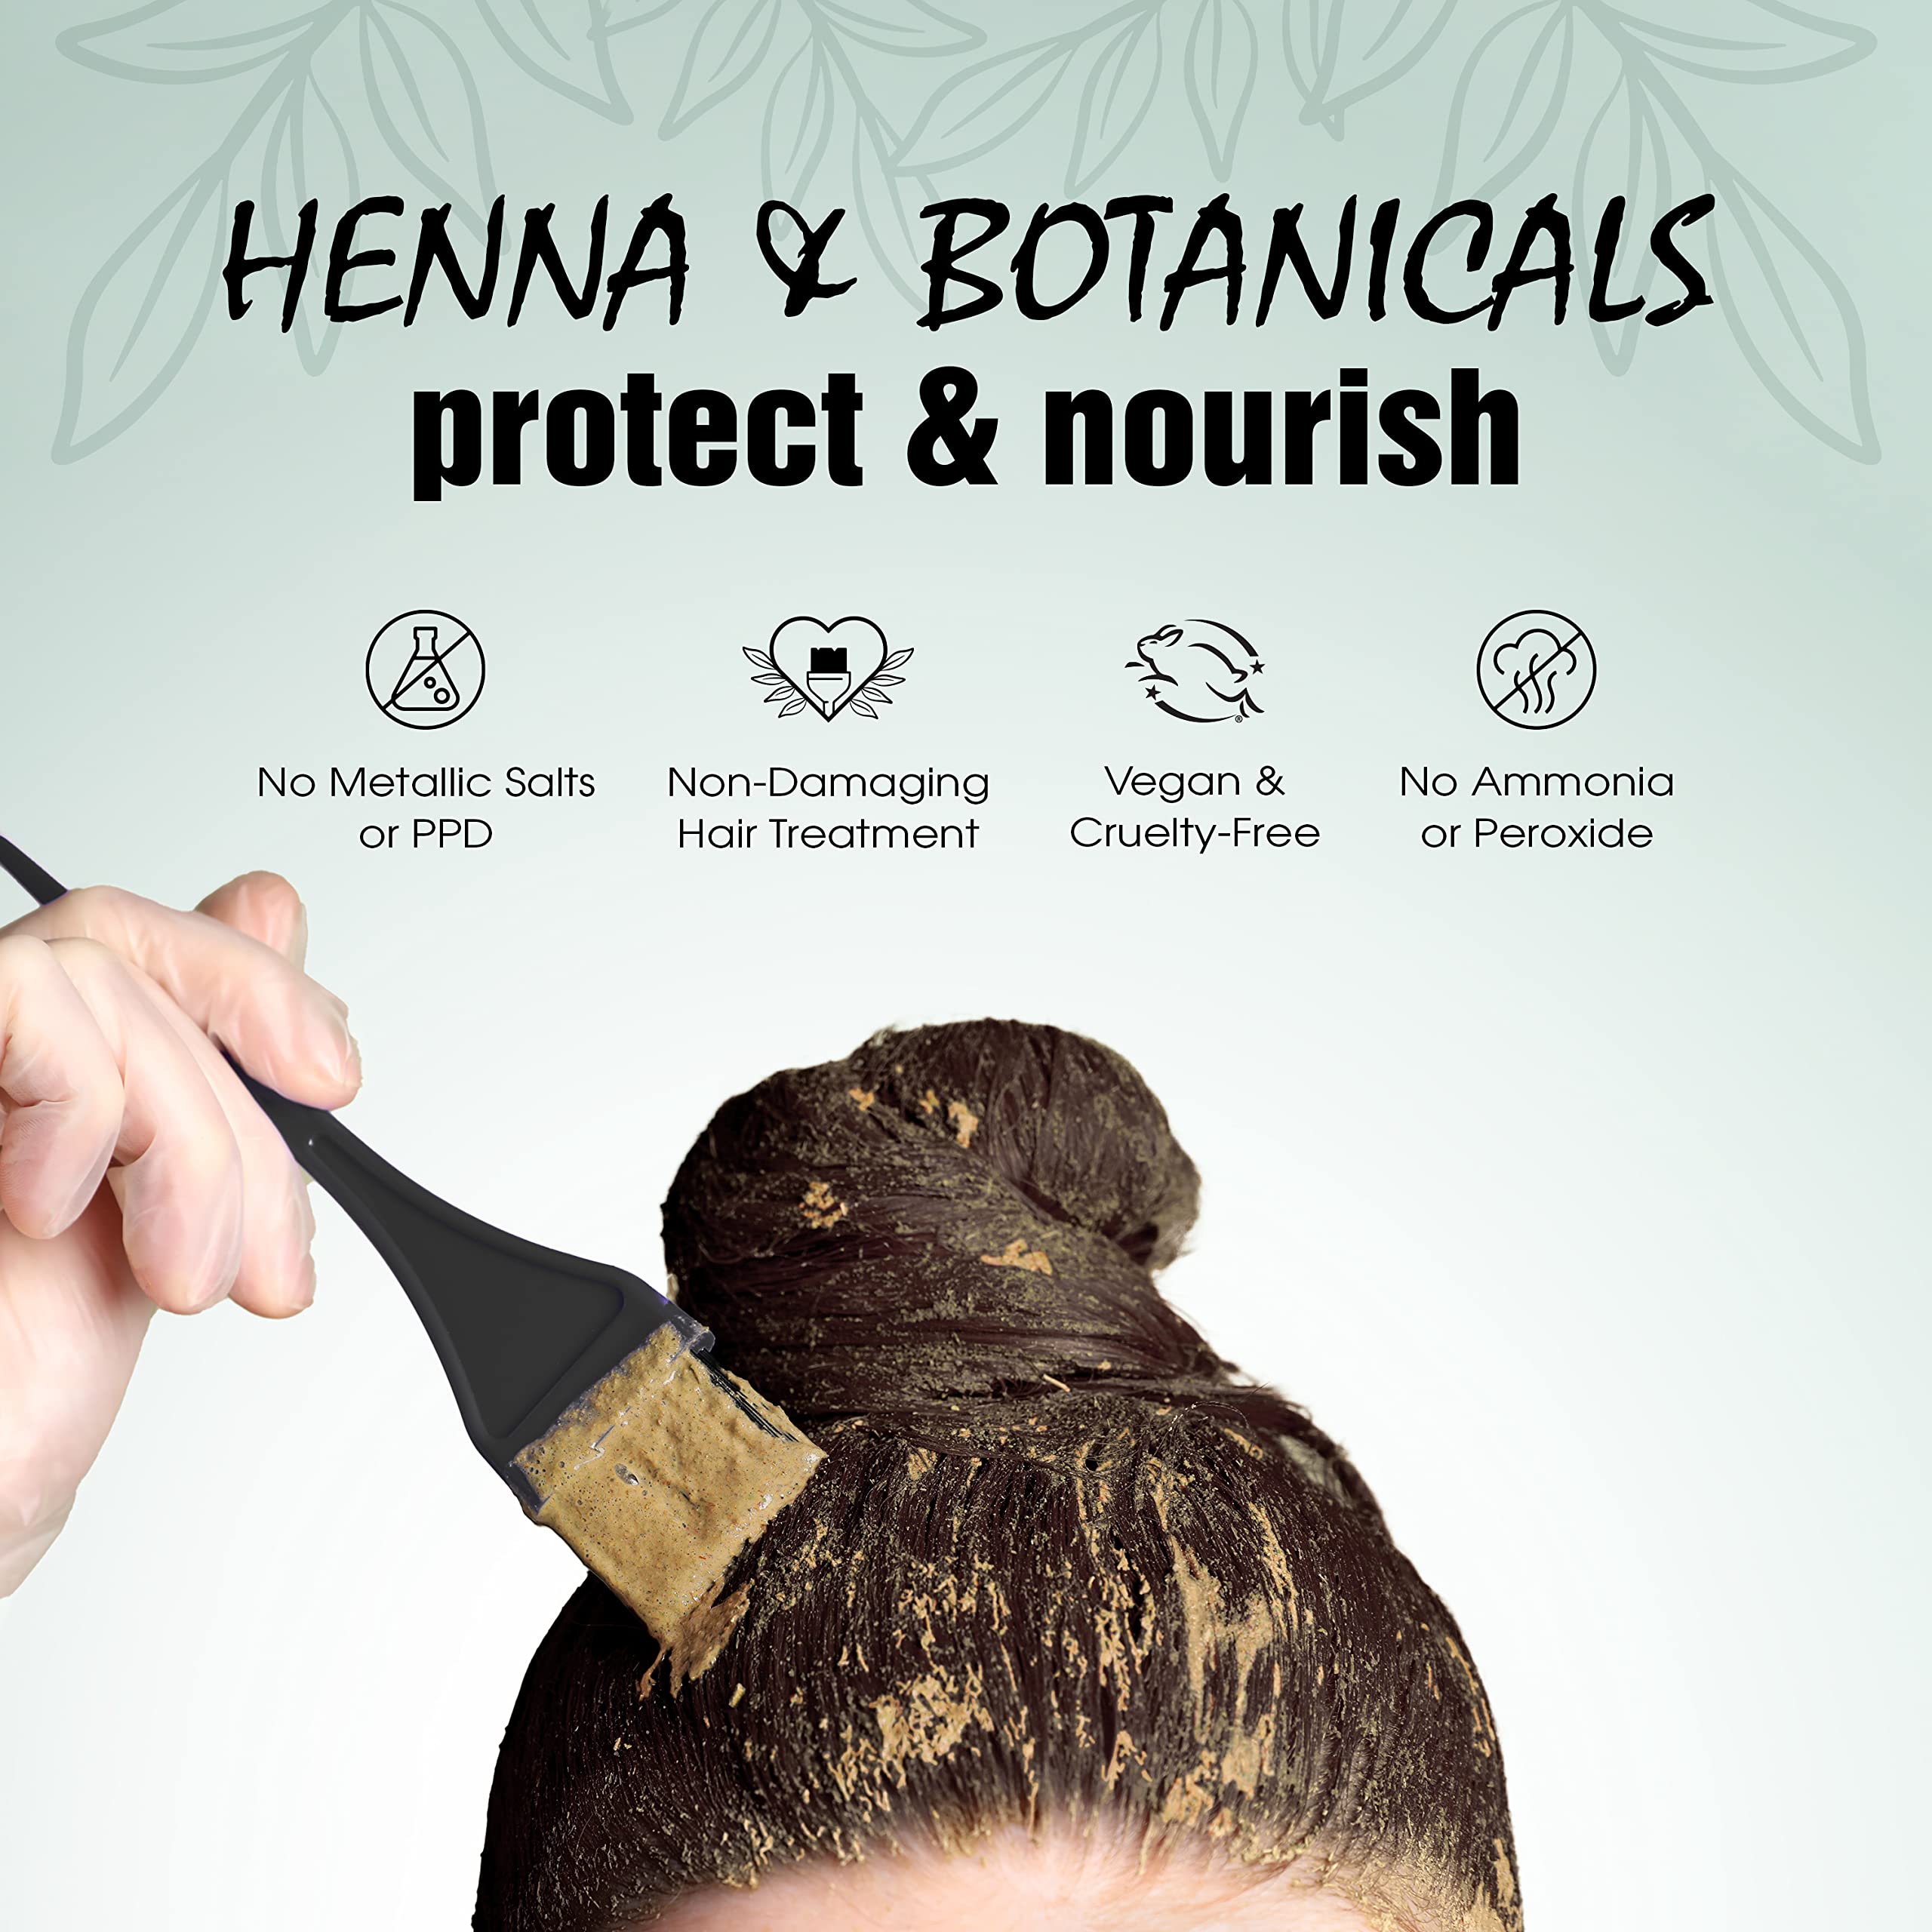 Light Mountain Henna Hair Color & Conditioner, Black - Organic Henna Leaf Powder, Pure Botanical Semi-Permanent Hair Color with Conditioning Benefits, 4 Oz (Pack of 3)